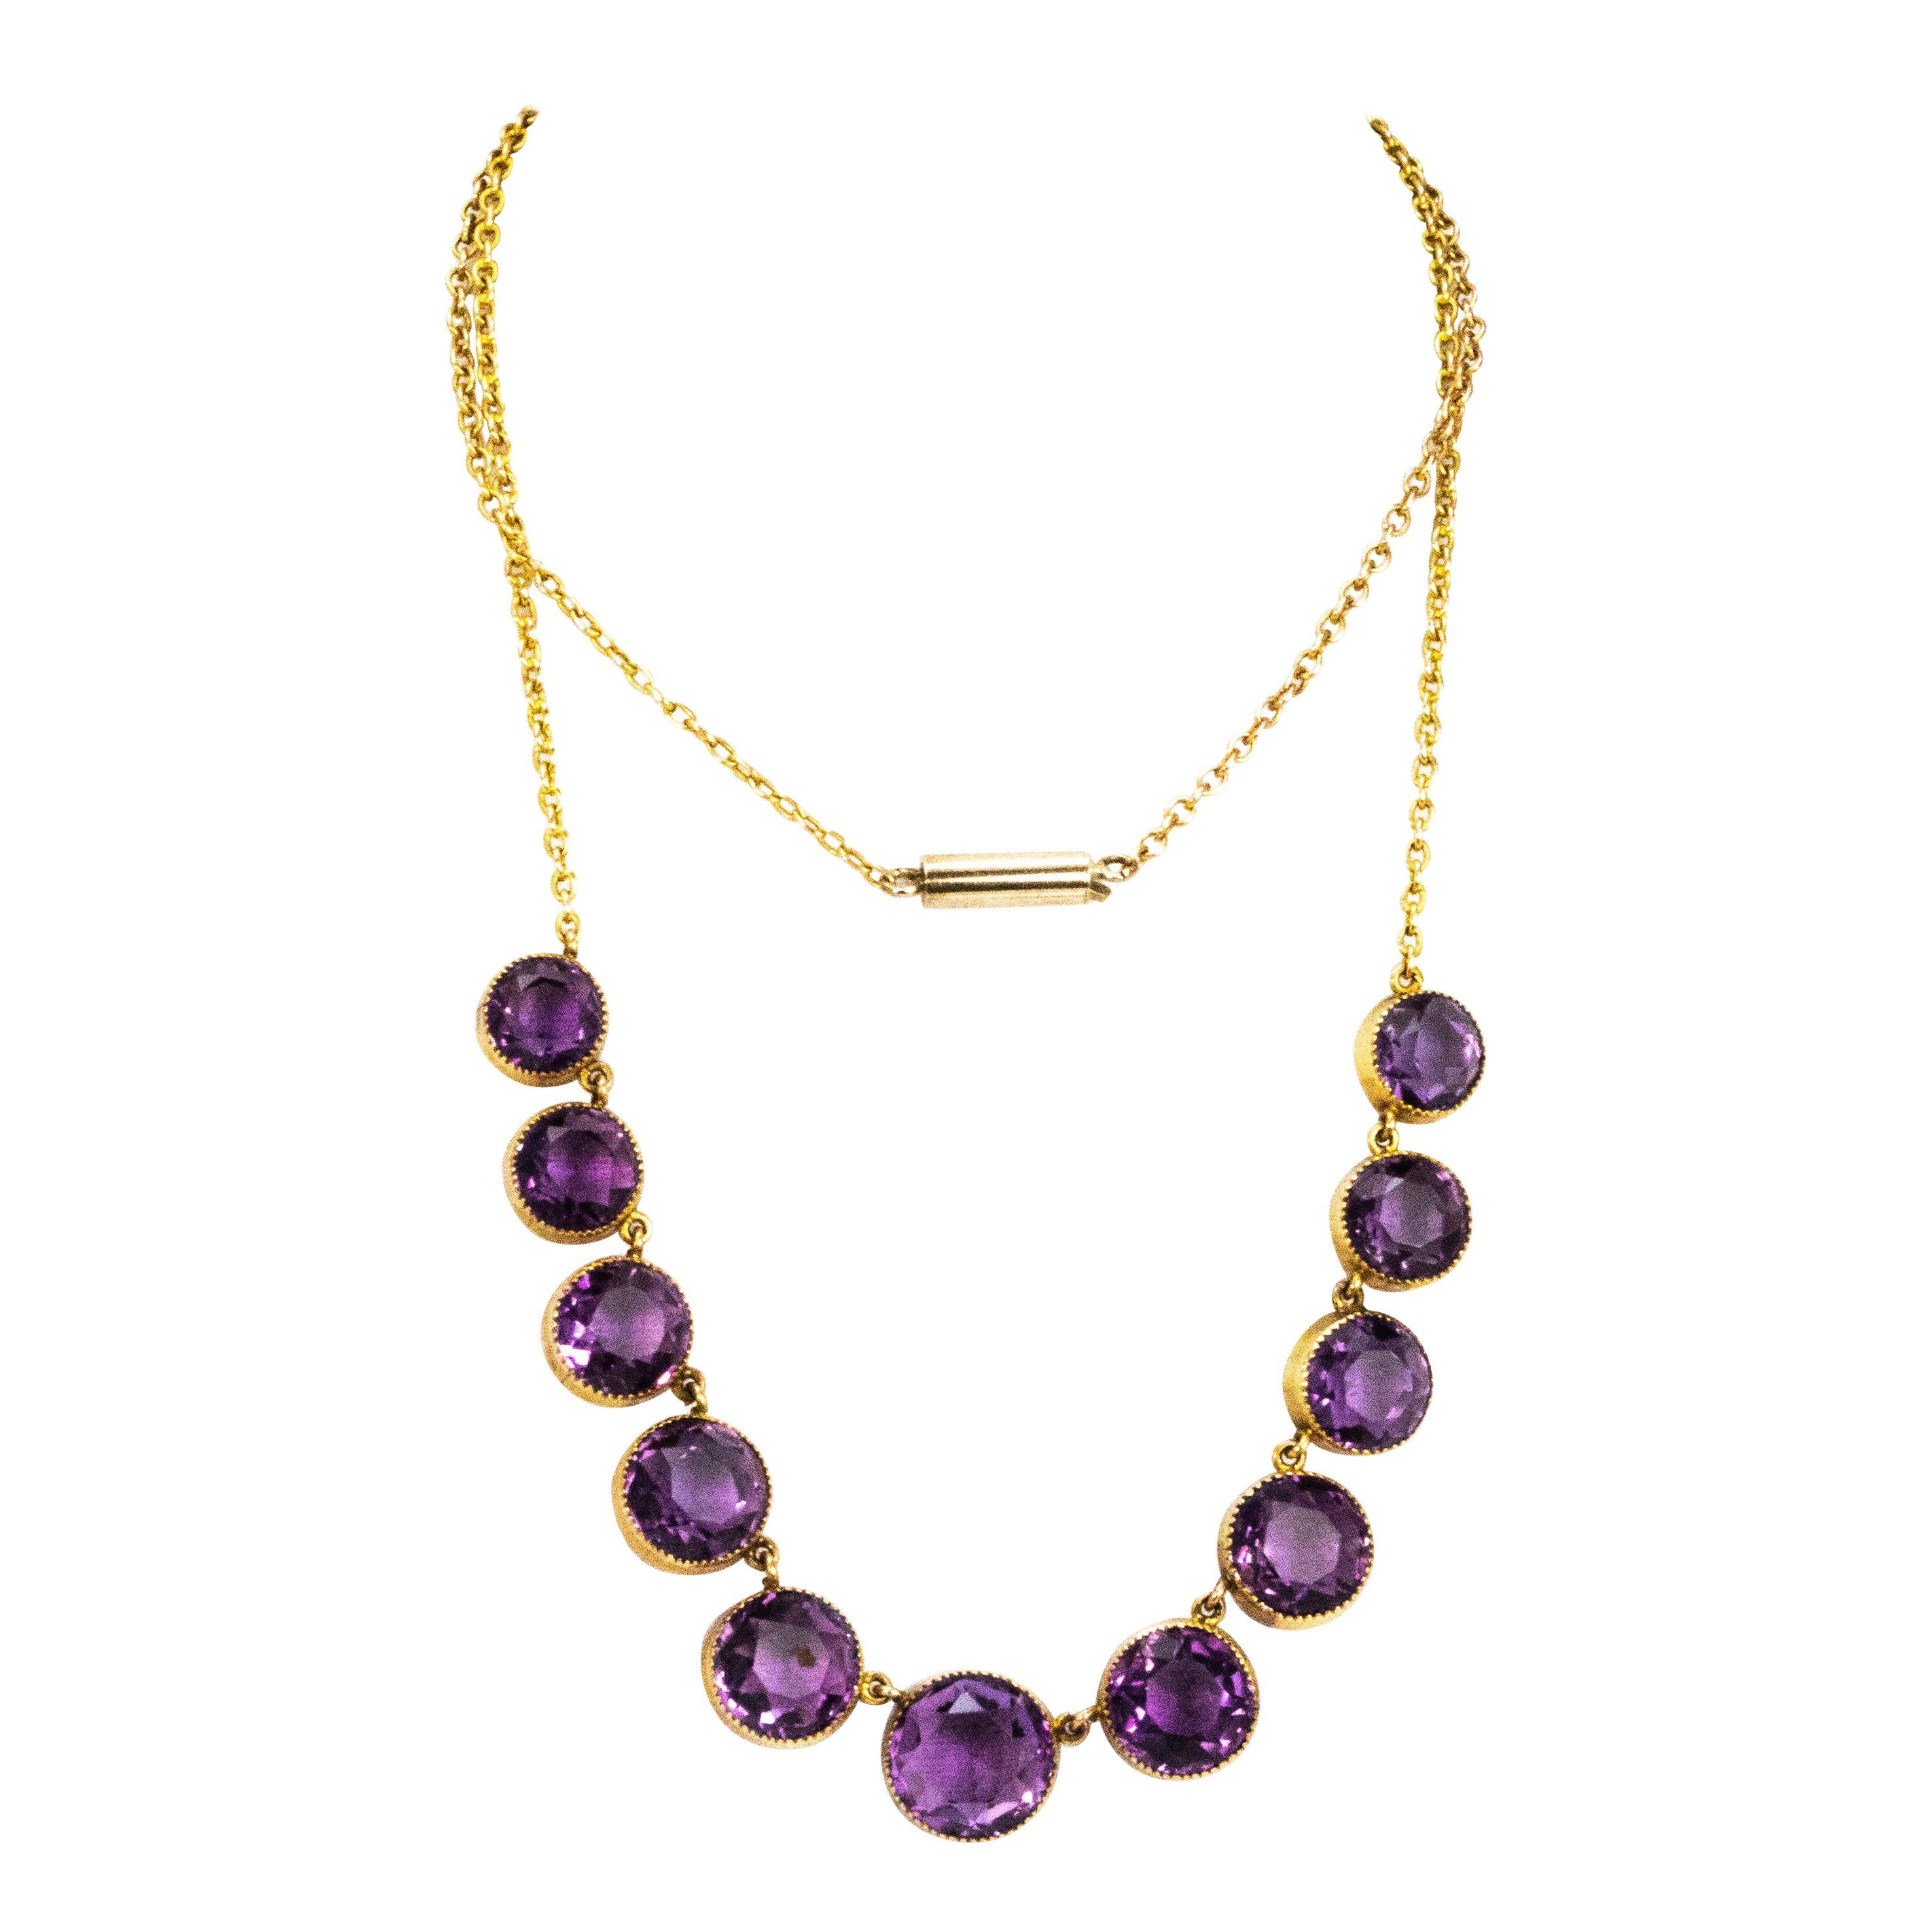 Vintage Amethyst and 9 Carat Gold Riviere